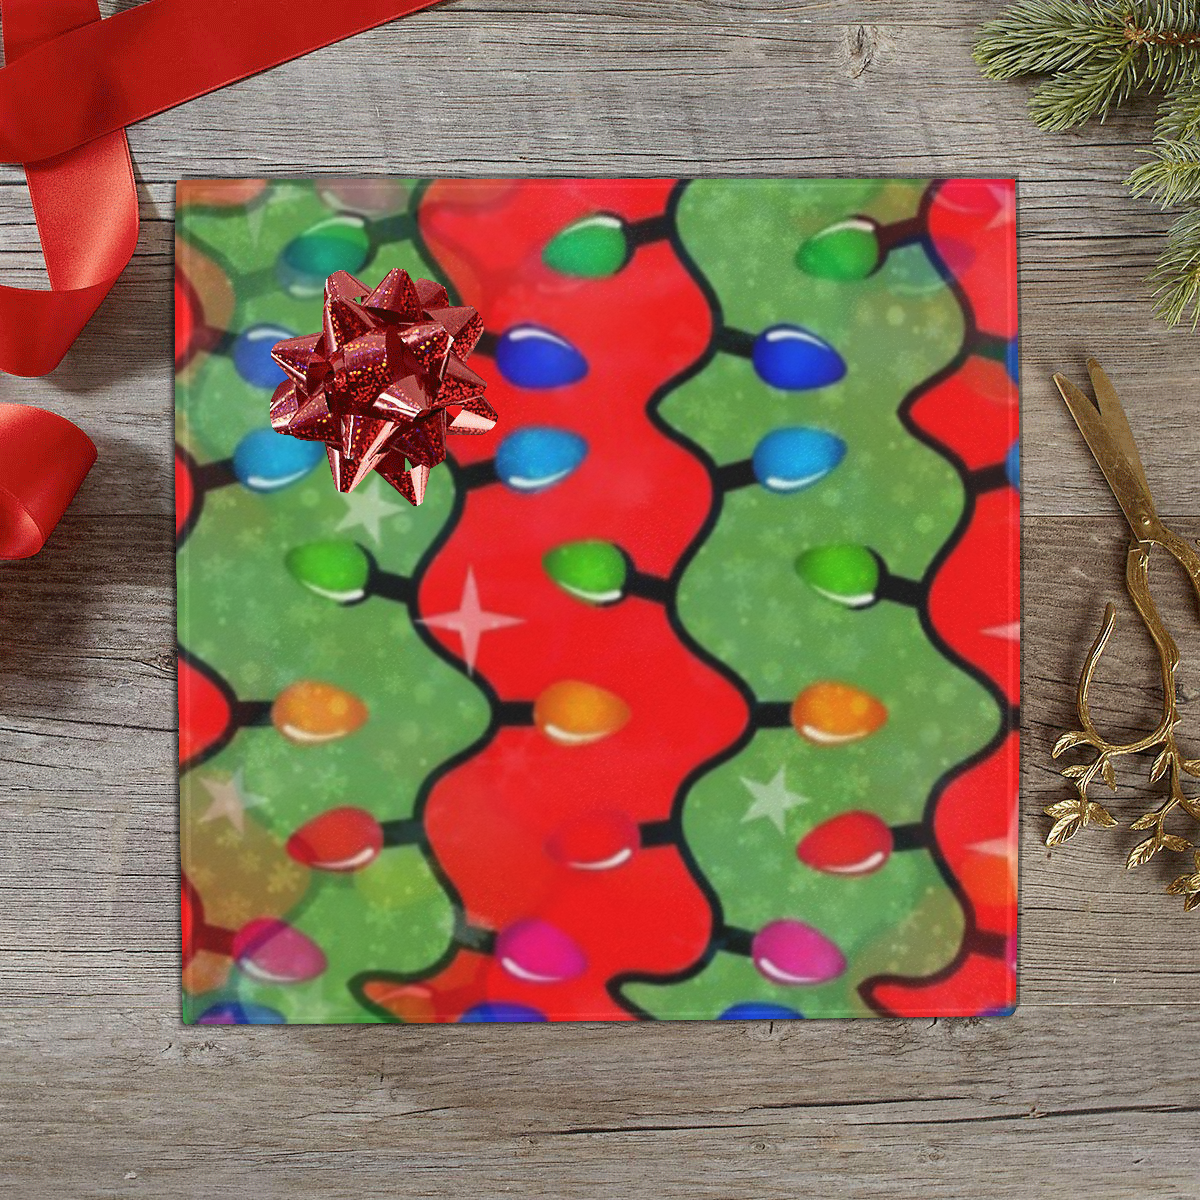 Christmas Lights 2 by Nico Bielow Gift Wrapping Paper 58"x 23" (3 Rolls)